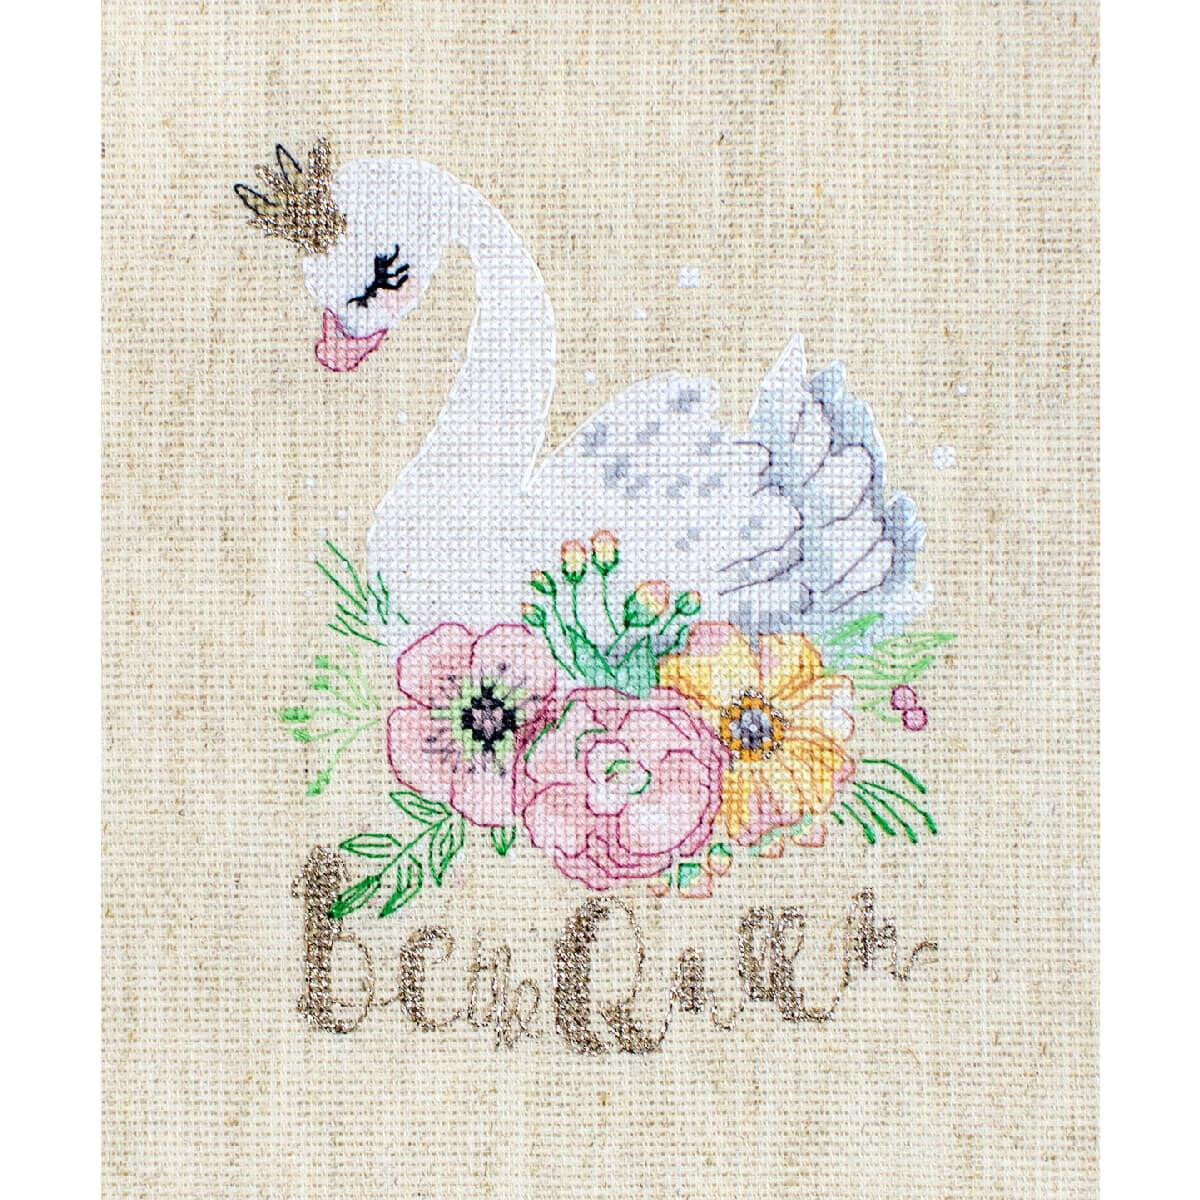 Letistitch counted cross stitch kit "Be the...